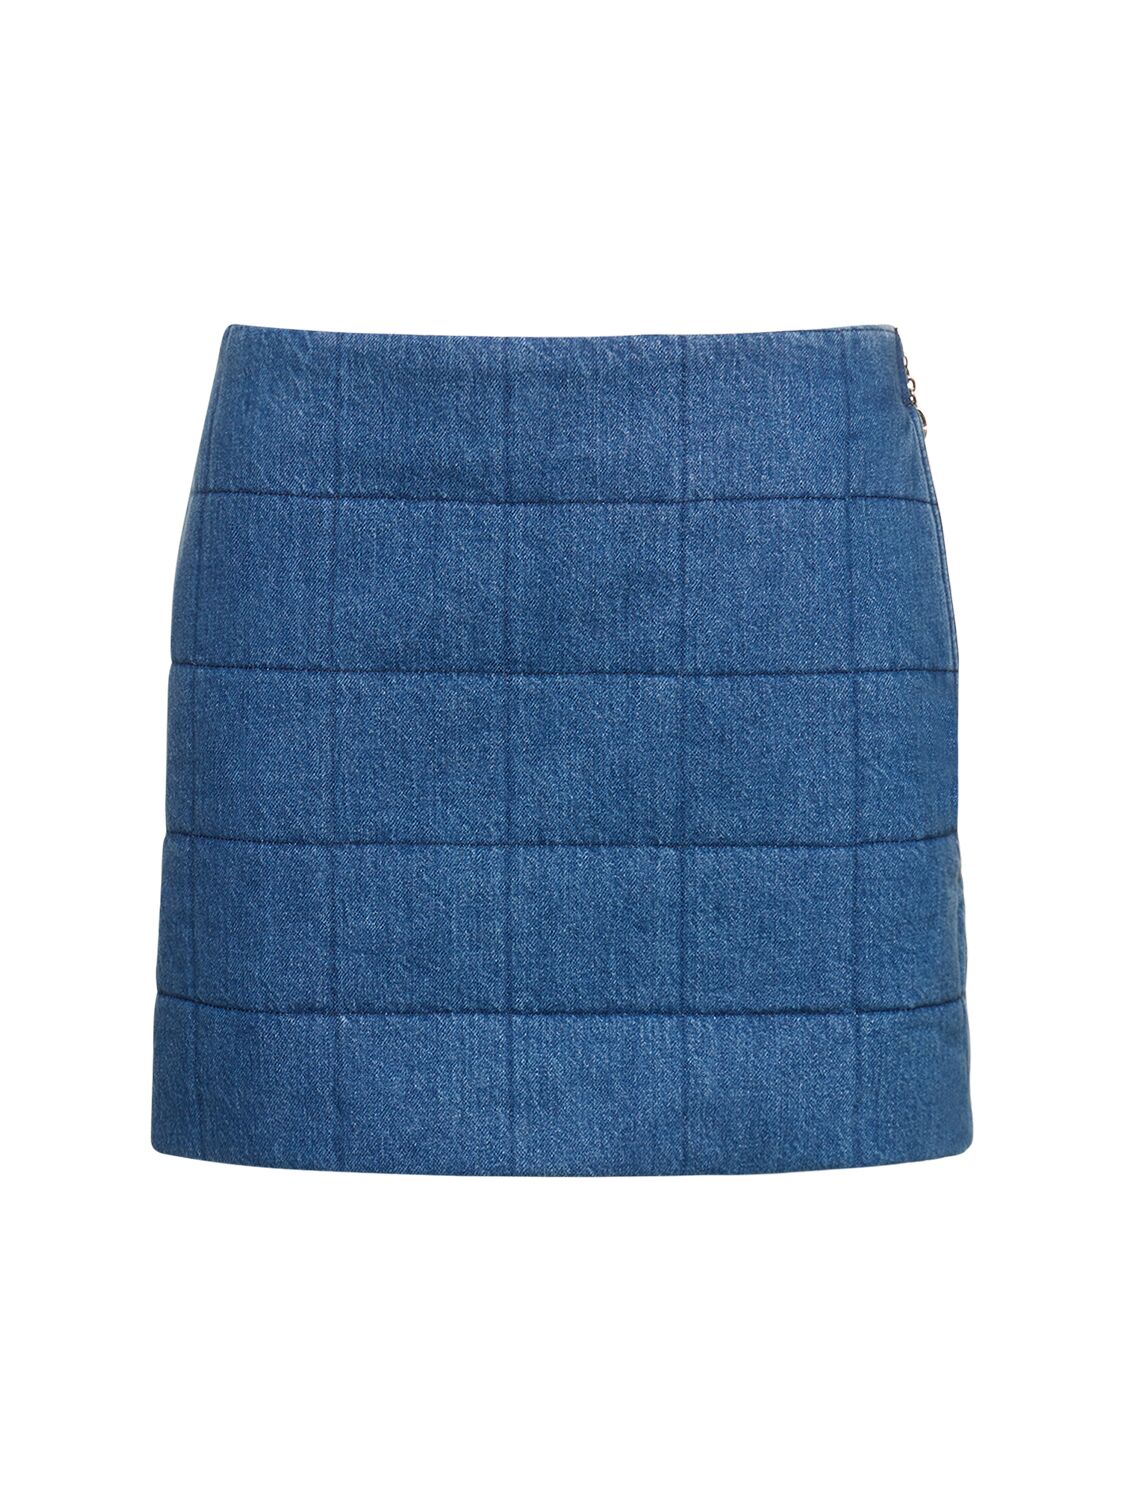 Image of Quilted Denim Skirt